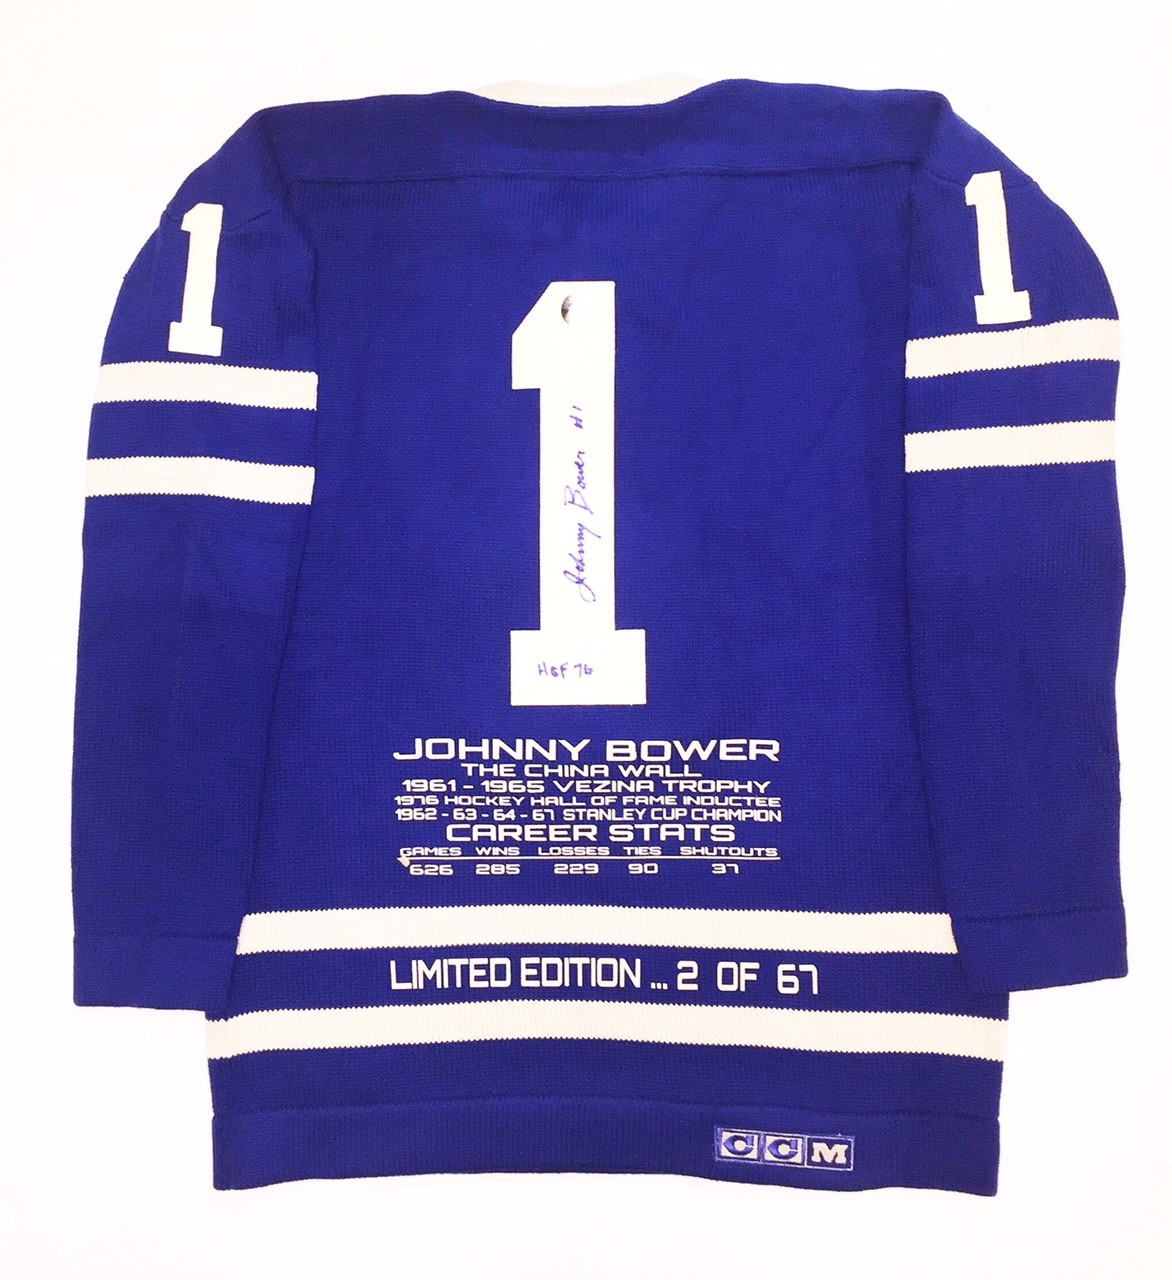 signed toronto maple leafs jersey